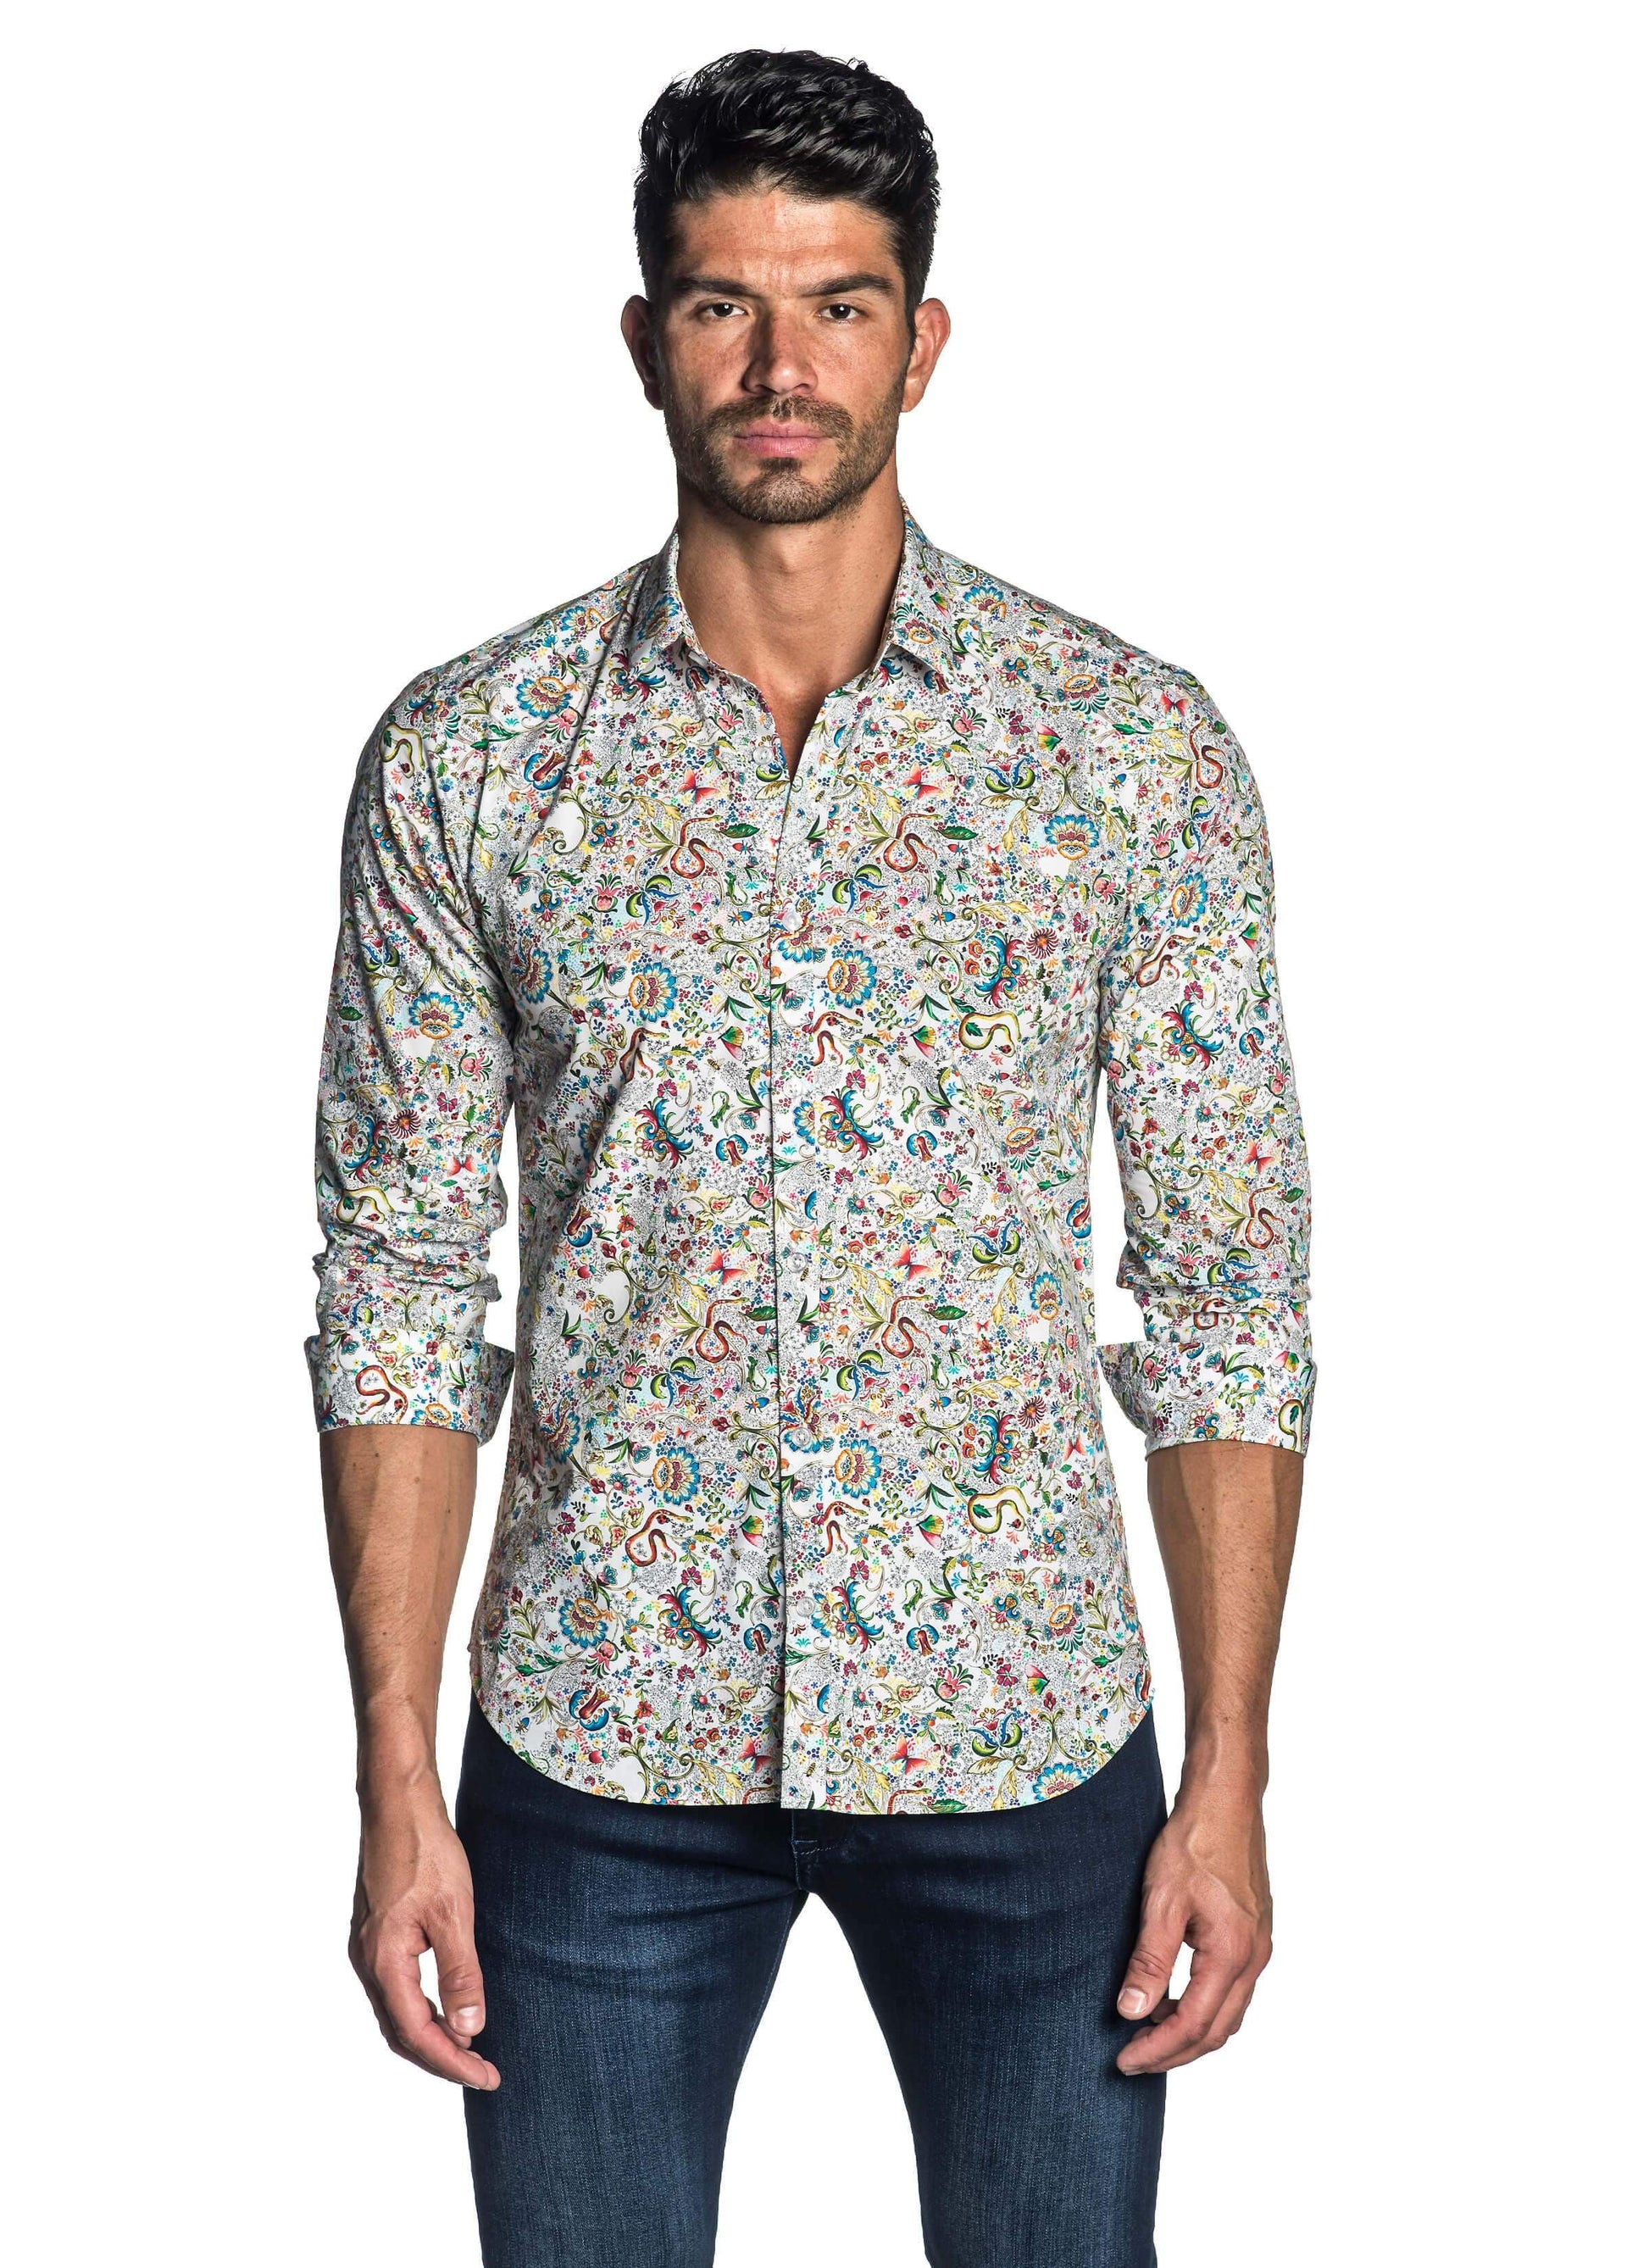 White and Multicolor Floral Degrade Printed Shirt AH-T-7063 - Front - Jared Lang